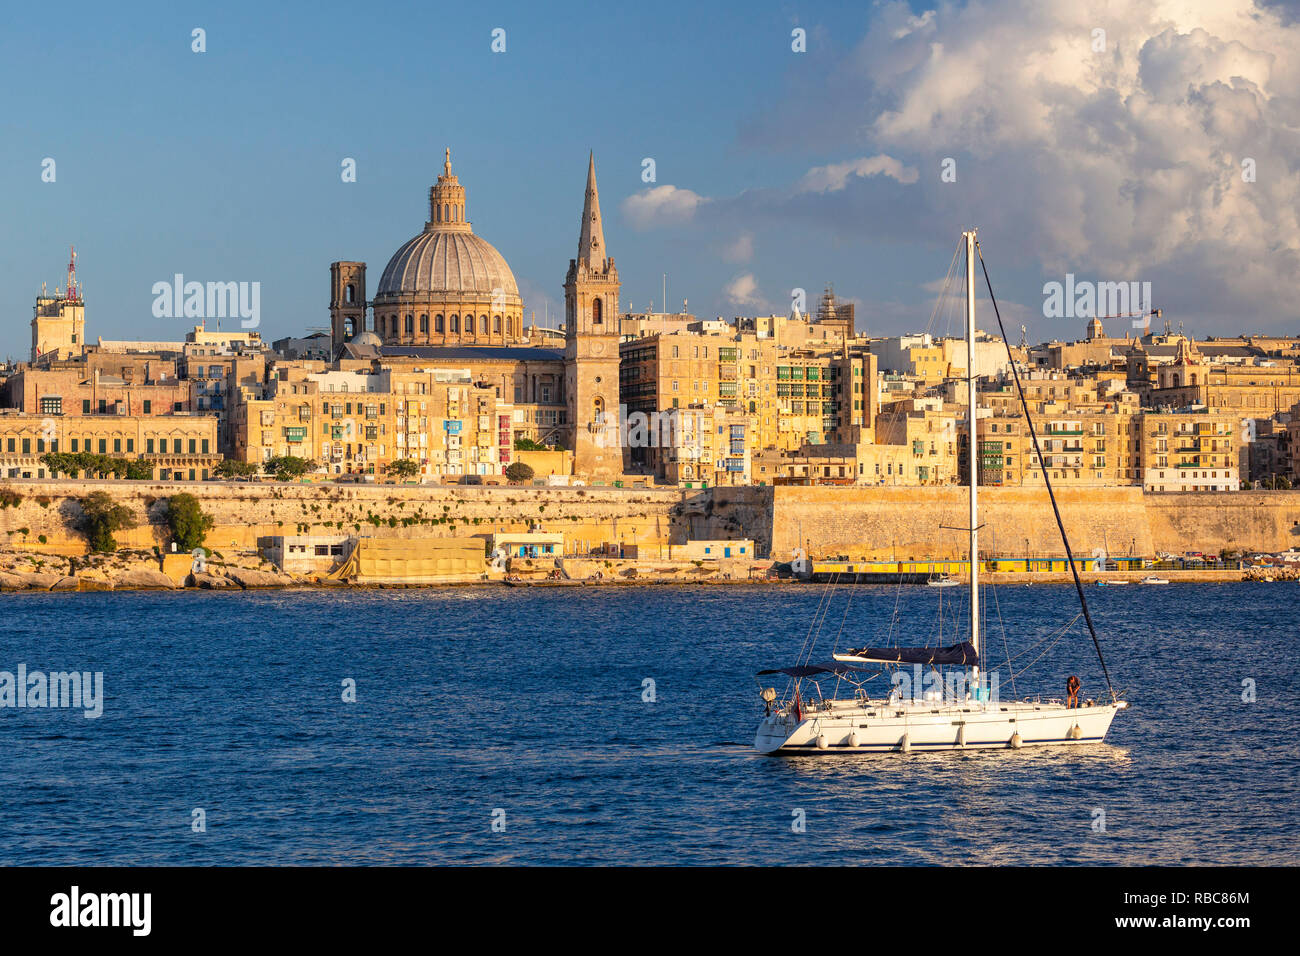 Malta, Malta, Valletta, View over Old Town with St John's Co-Cathedral Stock Photo